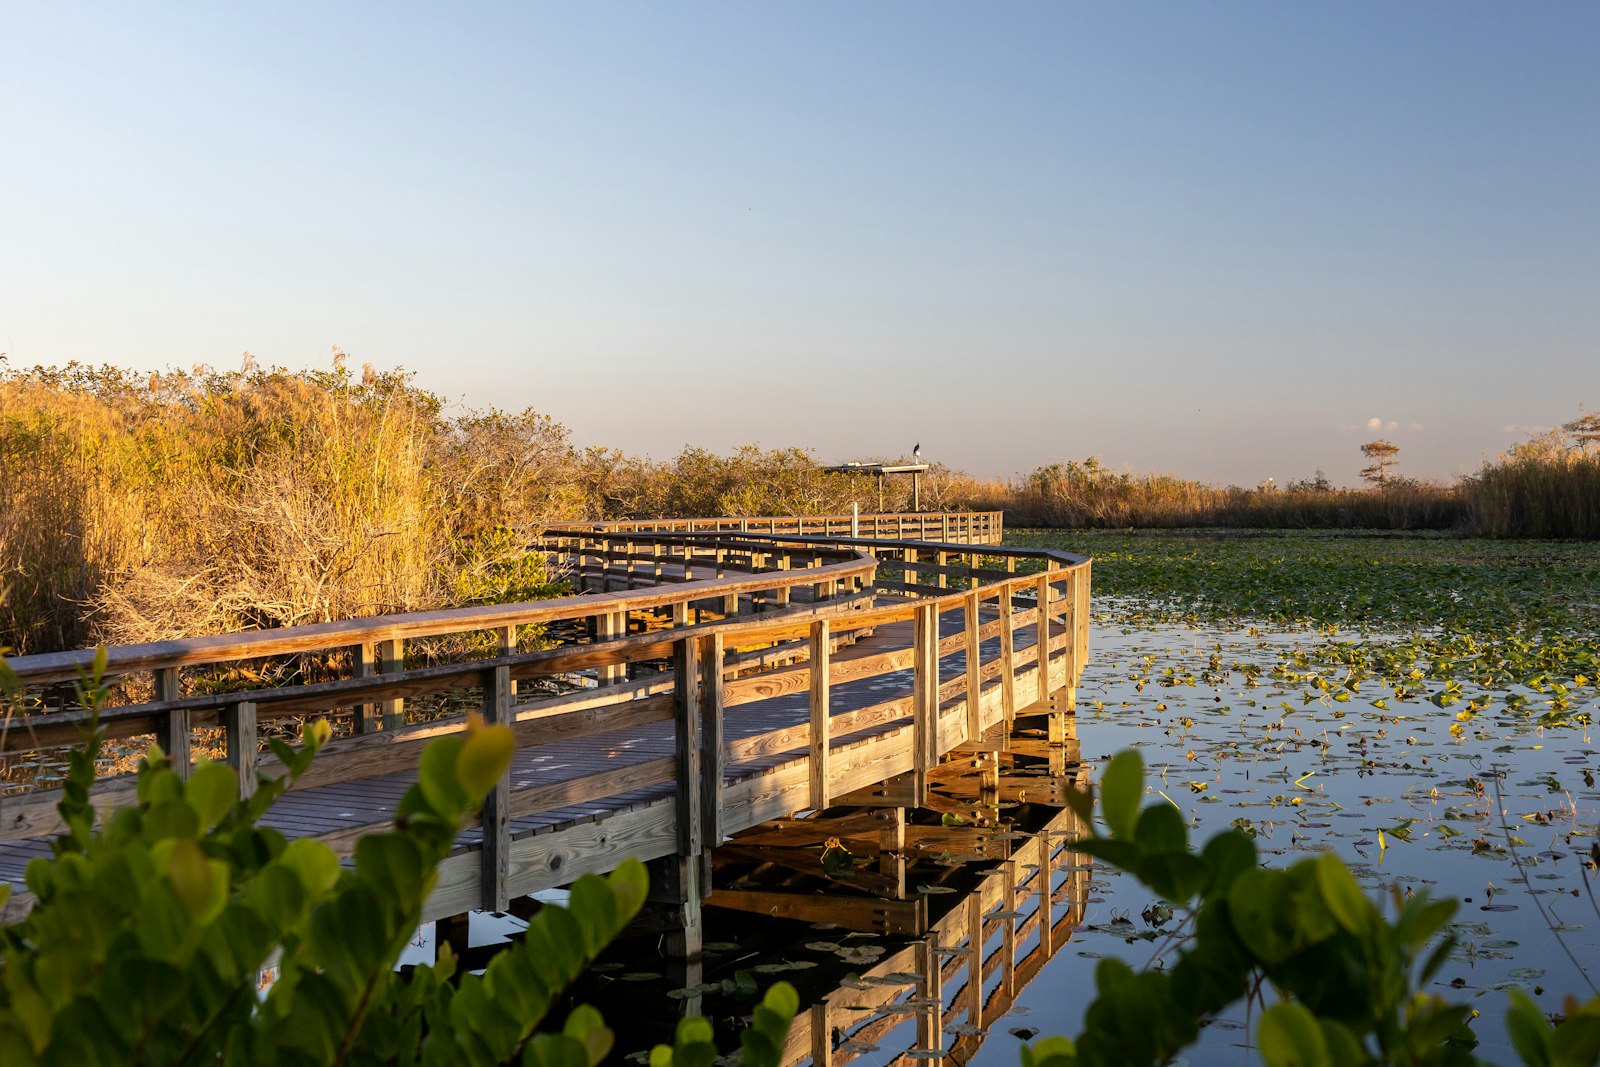 An elevated wooden platform trail winds around swamps into the distance